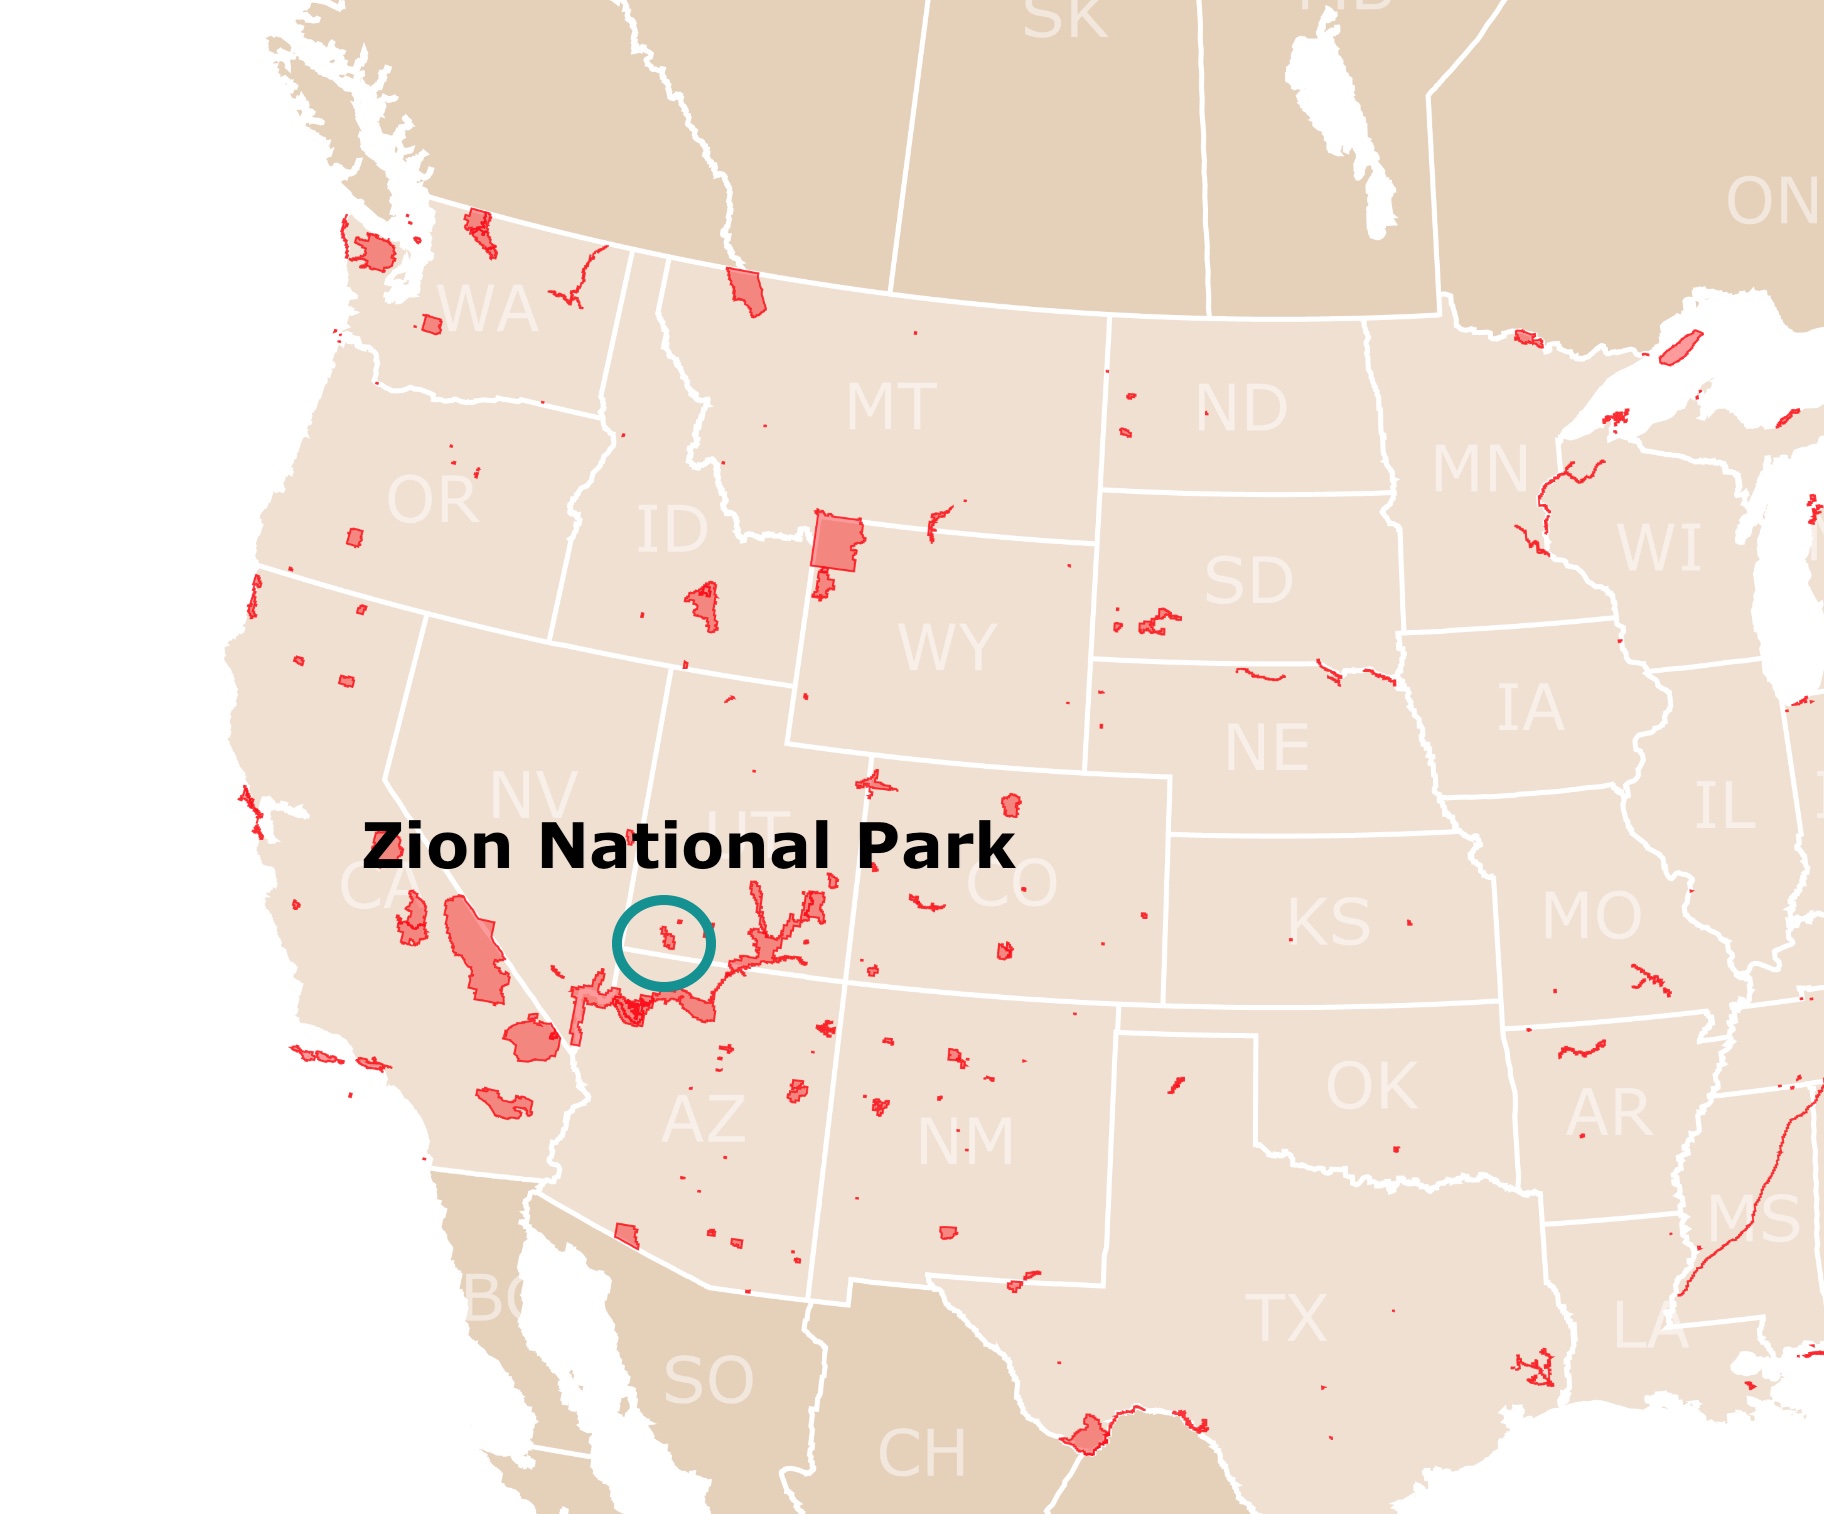 Map of Location of Zion National Park in Utah